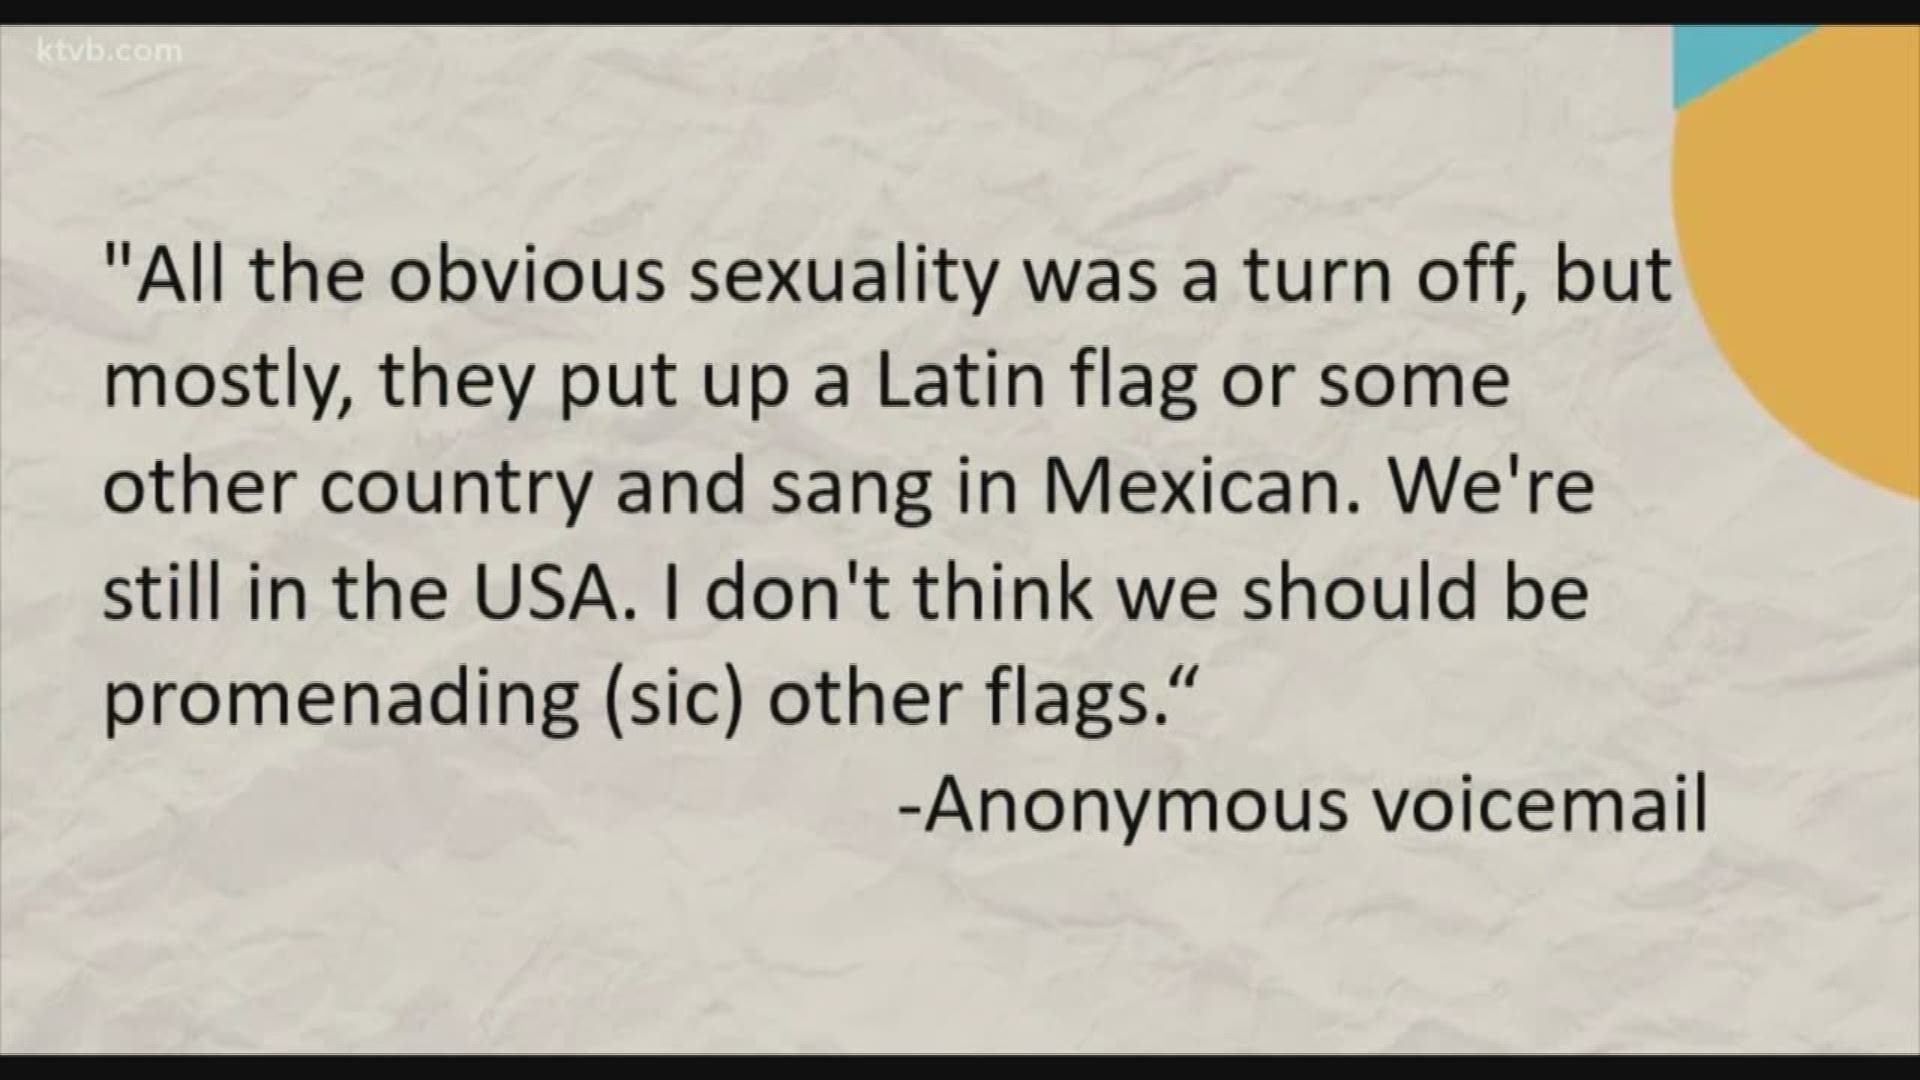 "They put up a Latin flag or some other country and sang in Mexican," the viewer said about seeing J Lo wave a Puerto Rican flag during the Super Bowl halftime show.